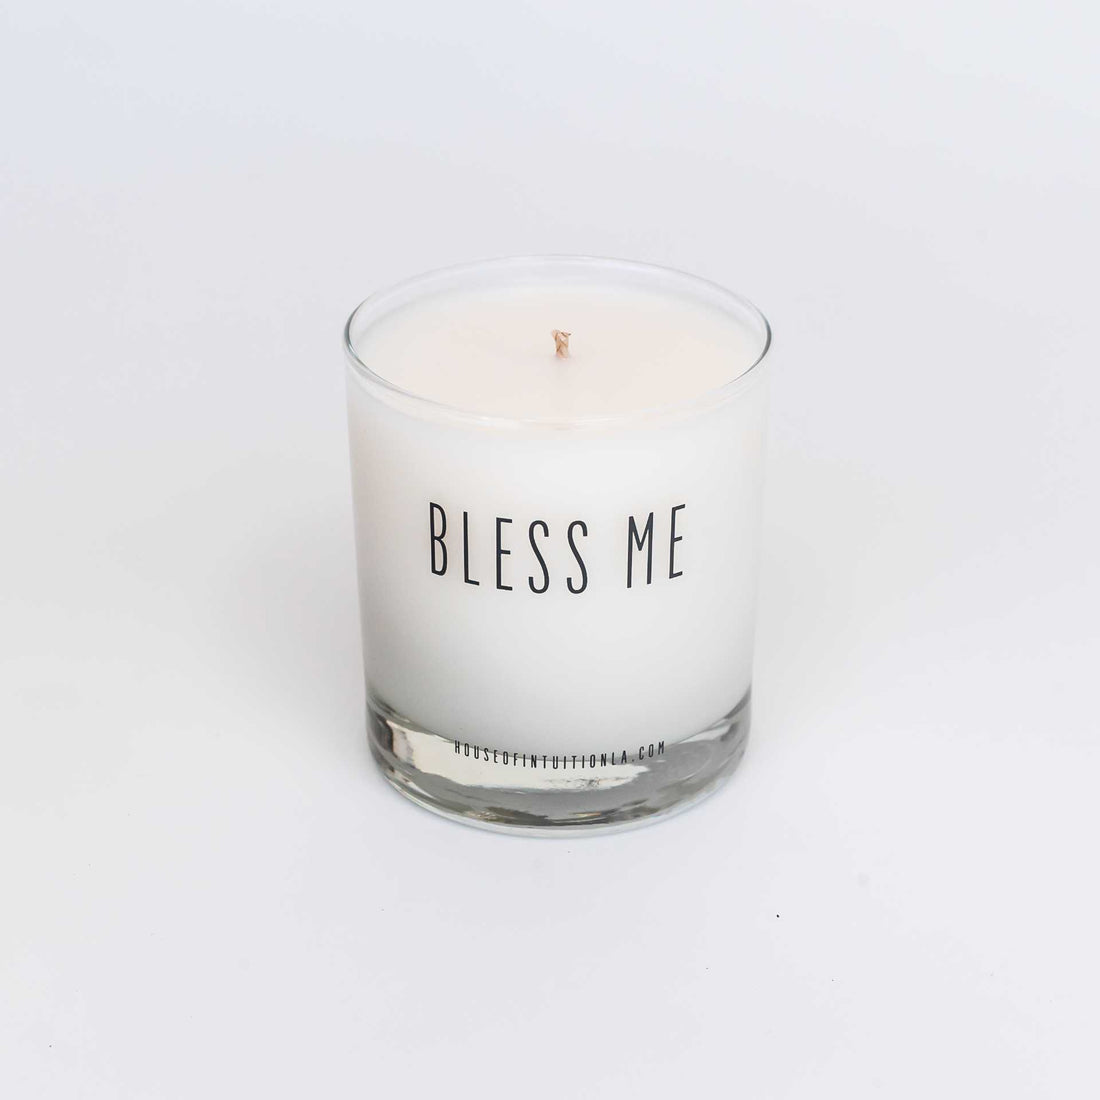 "BLESS ME with FERTILITY" Affirmation Soy Candle BLESS ME - Affirmation Candles House of Intuition 